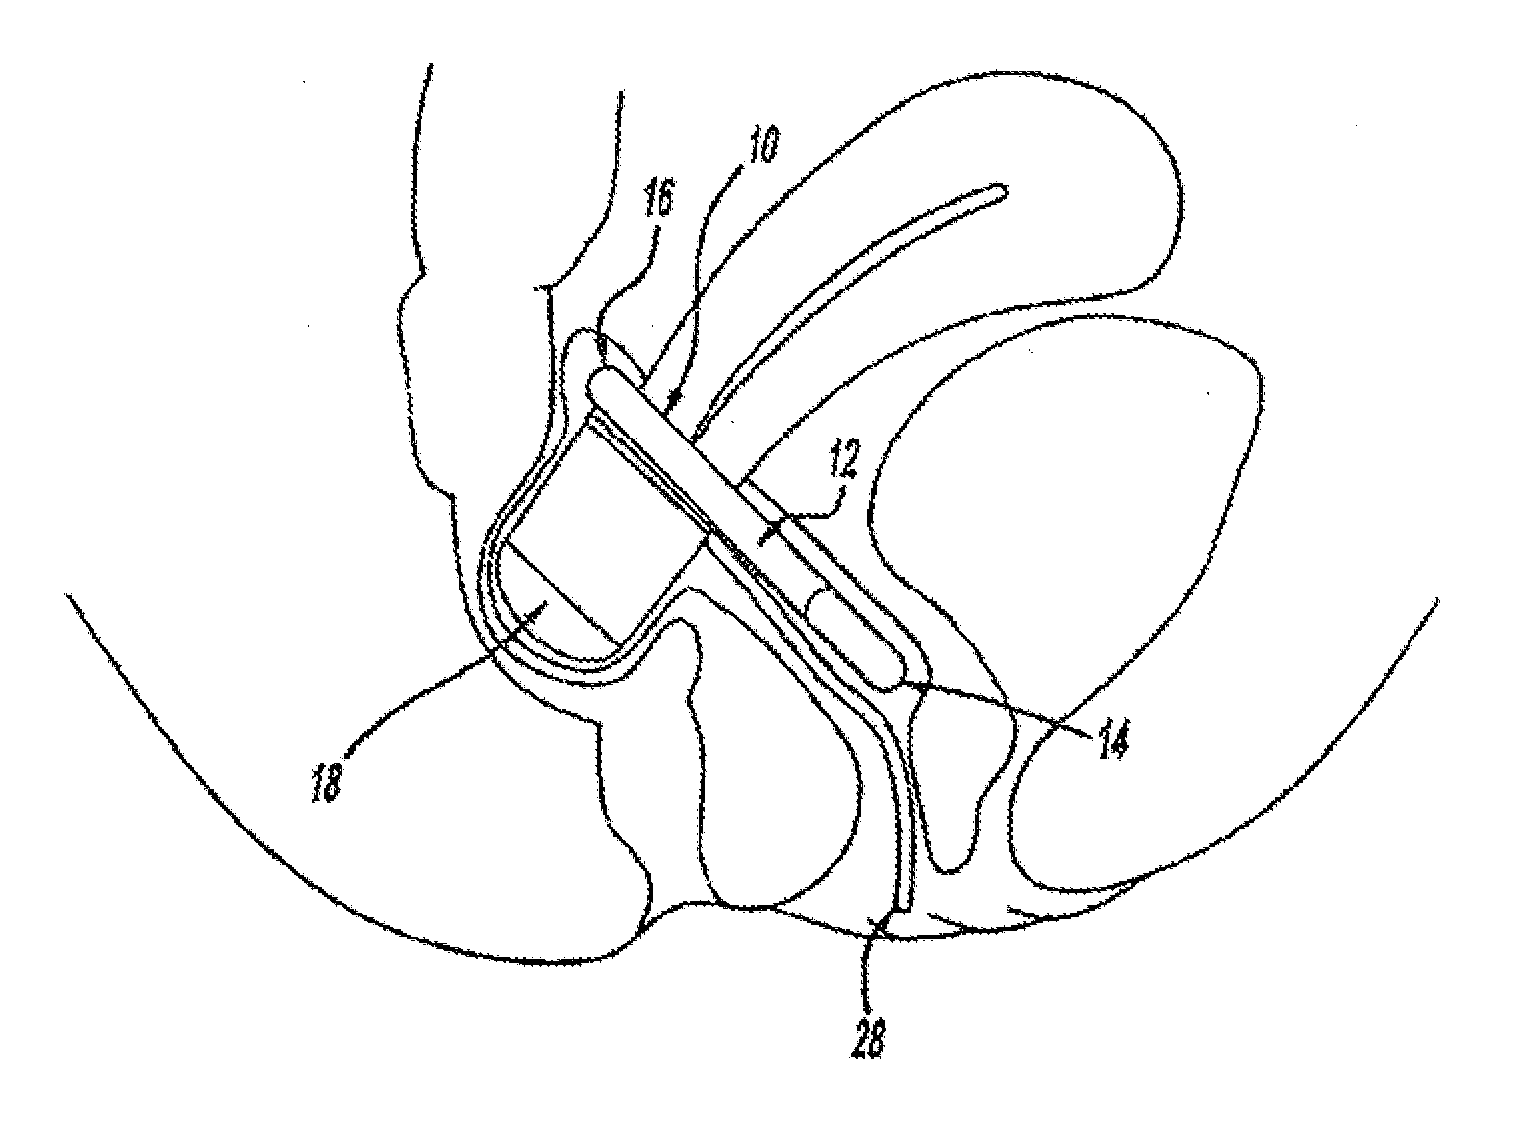 Intra-Vaginal Devices and Methods for Treating Fecal Incontinence